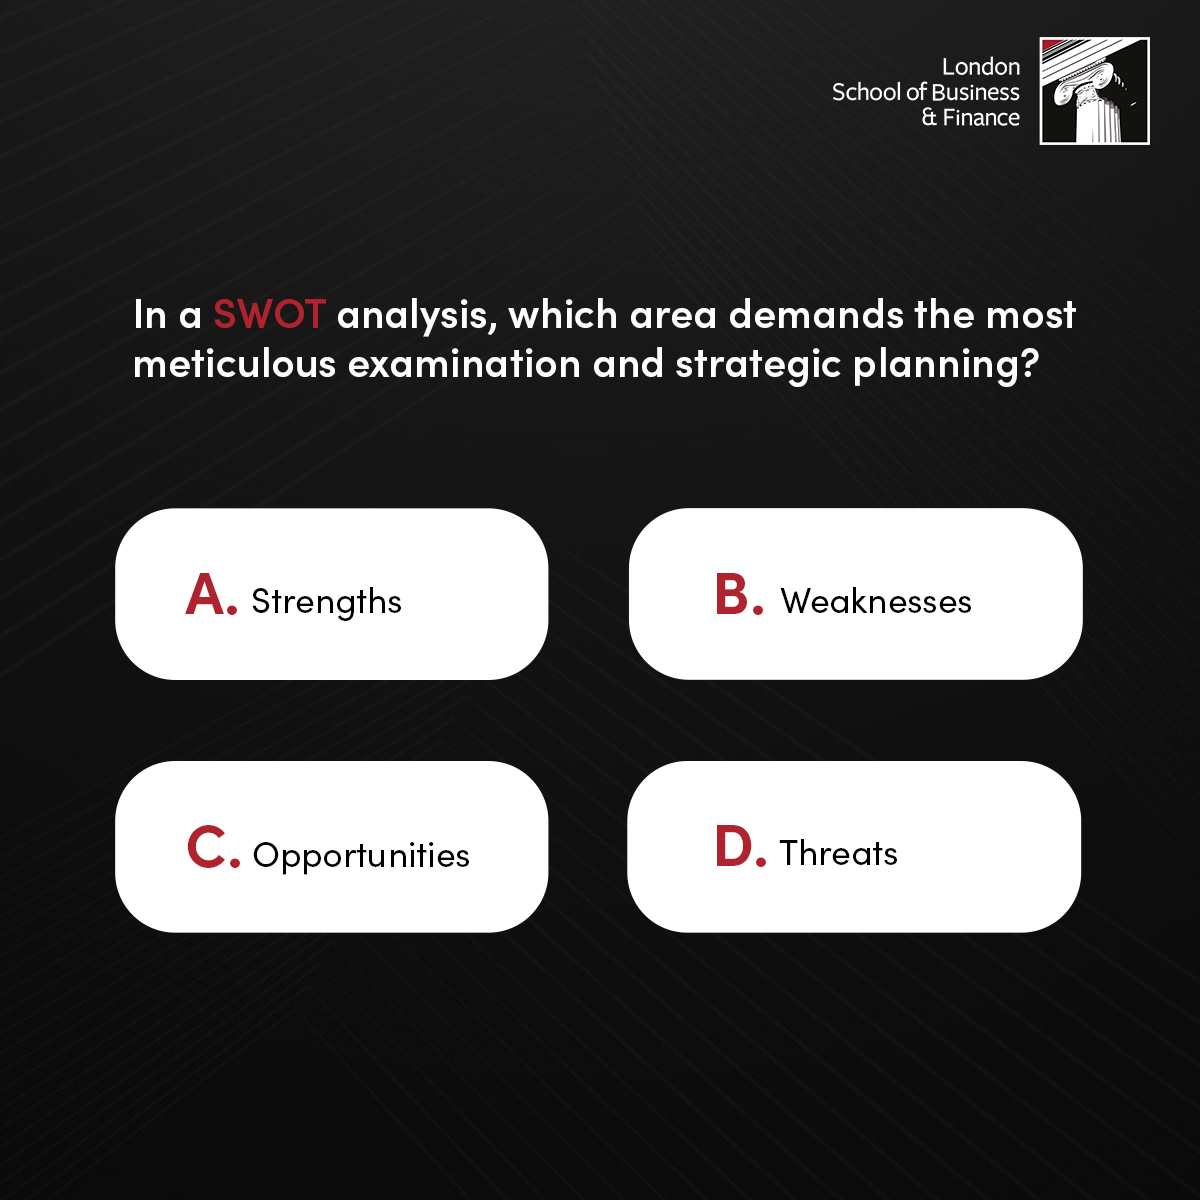 Did you know? SWOT analysis is used to analyse the business environment and assess organisations in terms of their strengths, weaknesses, opportunities, and threats both internally and externally. How well do you know business analysis? 

#LSBF #BusinessQuiz #SWOTAnalysis